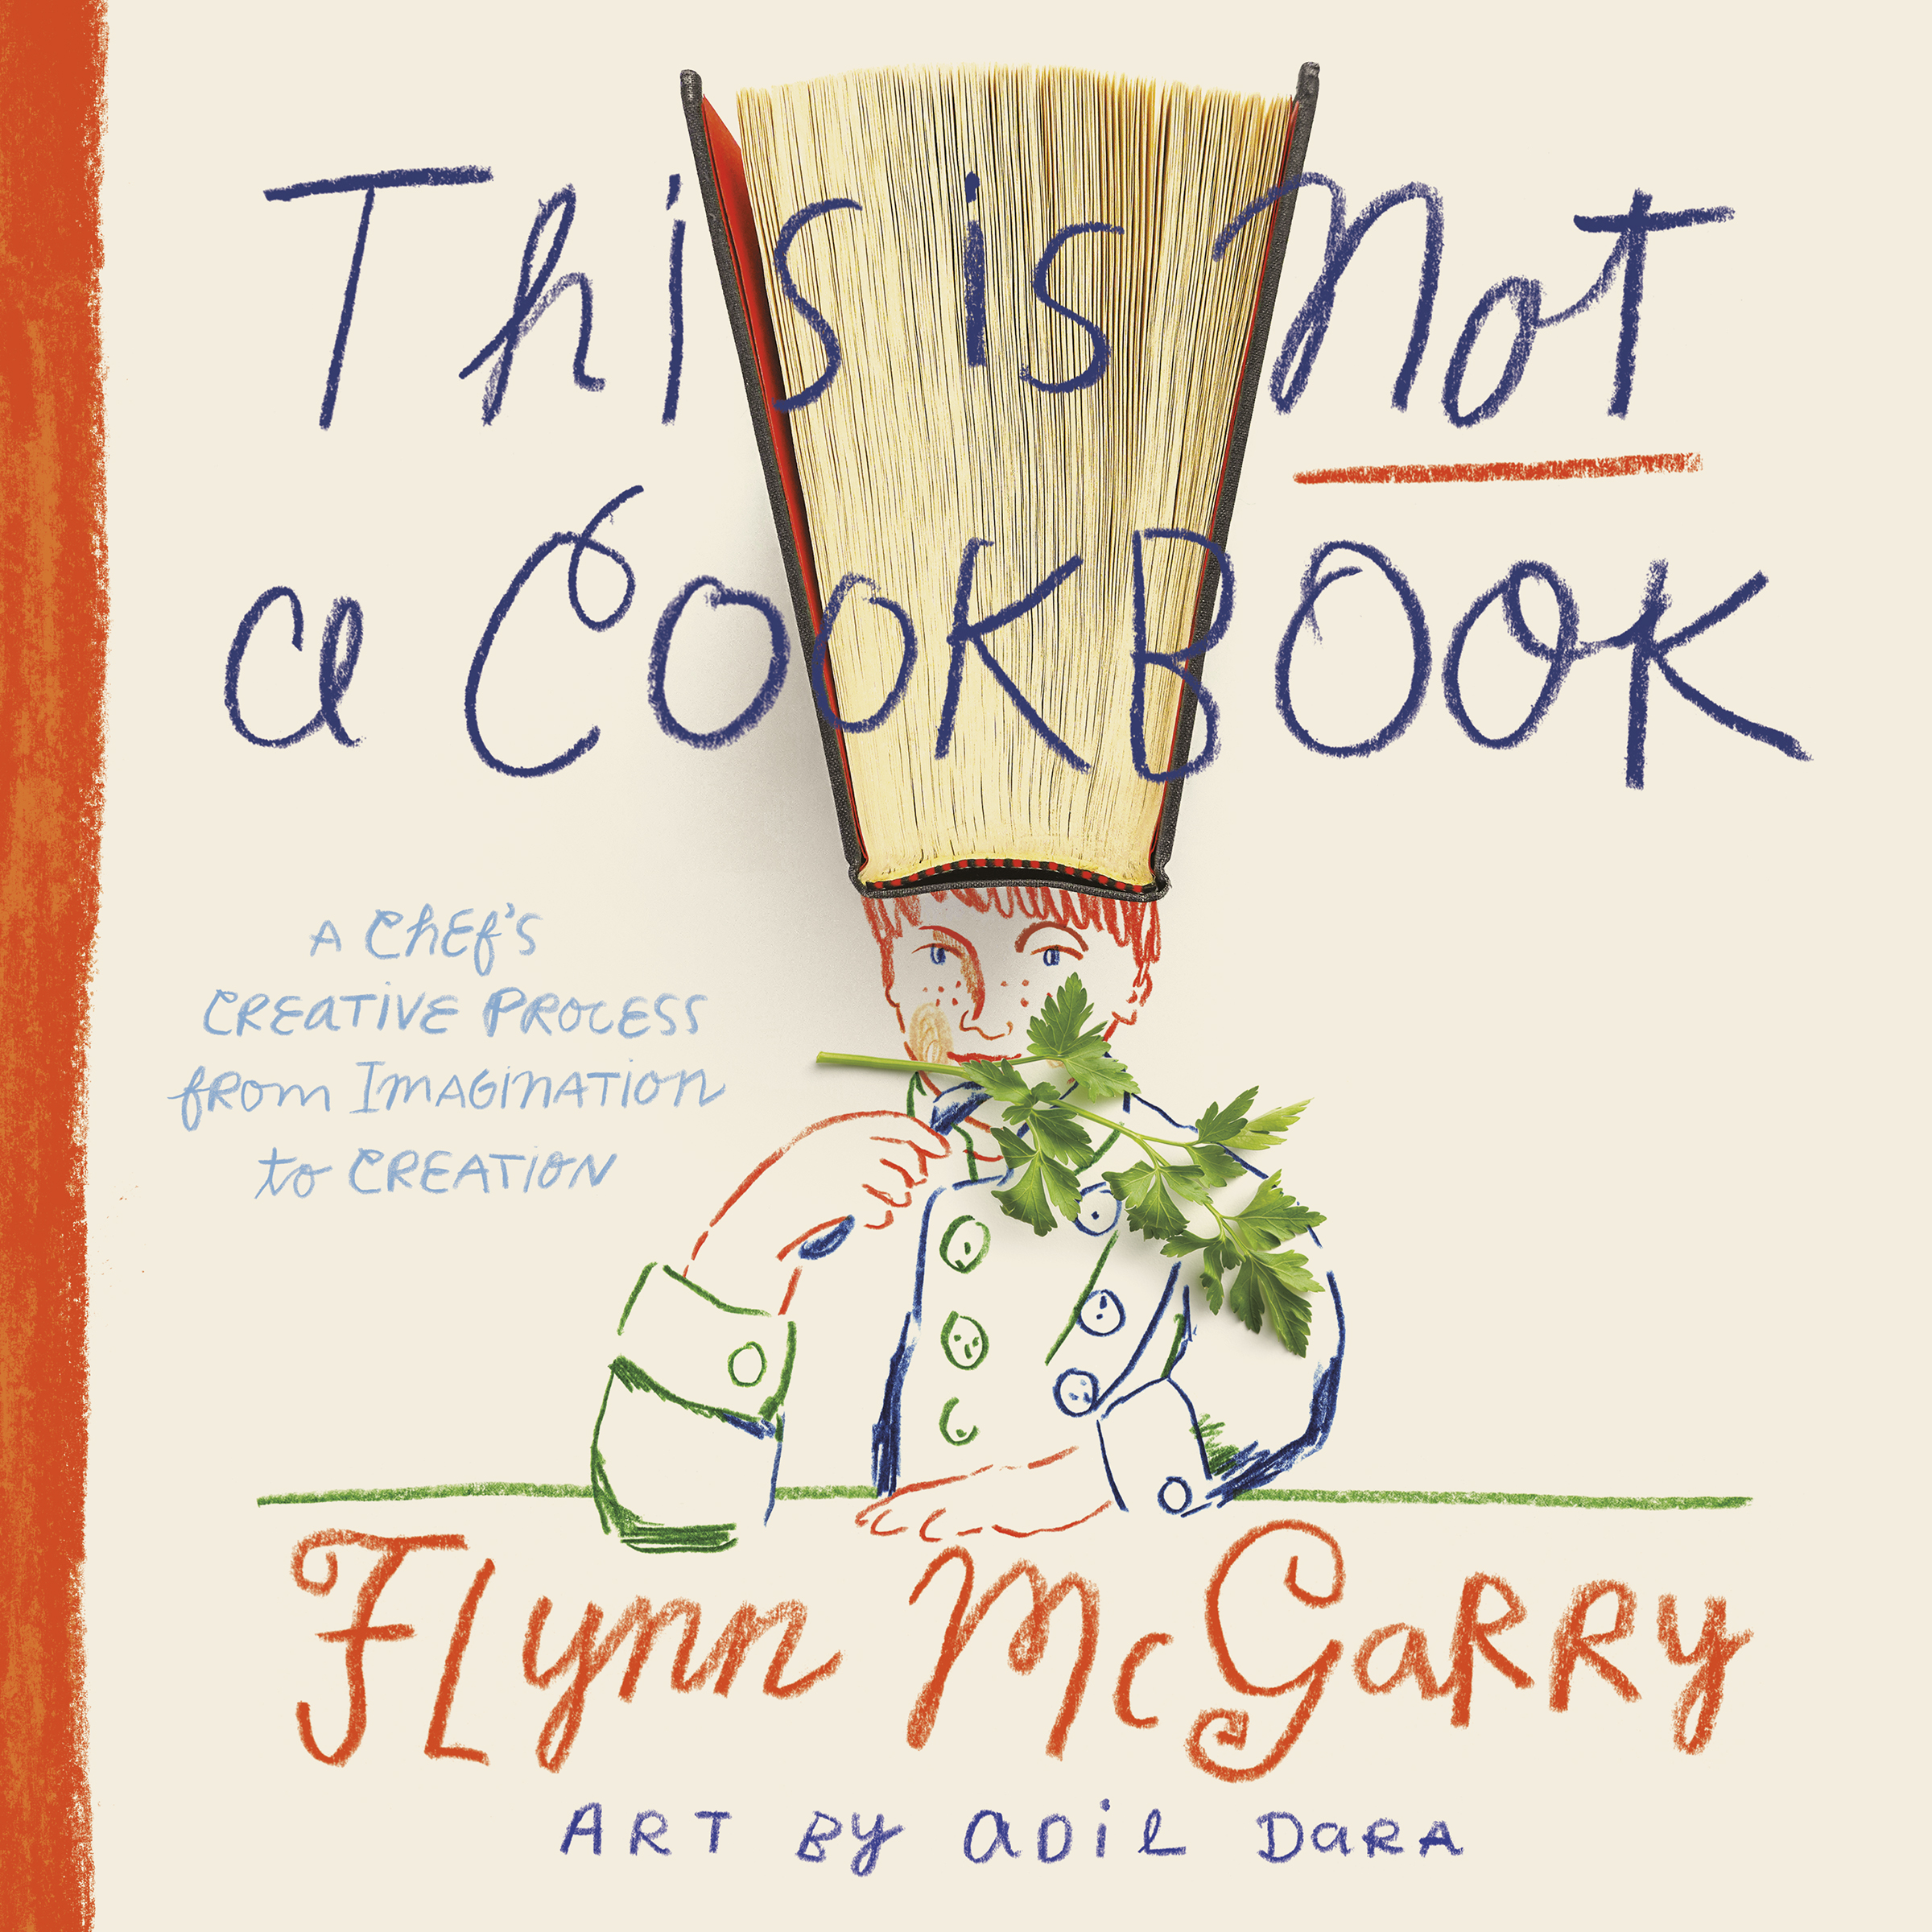 This Is Not a Cookbook: A Chef’s Creative Process from Imagination to Creation